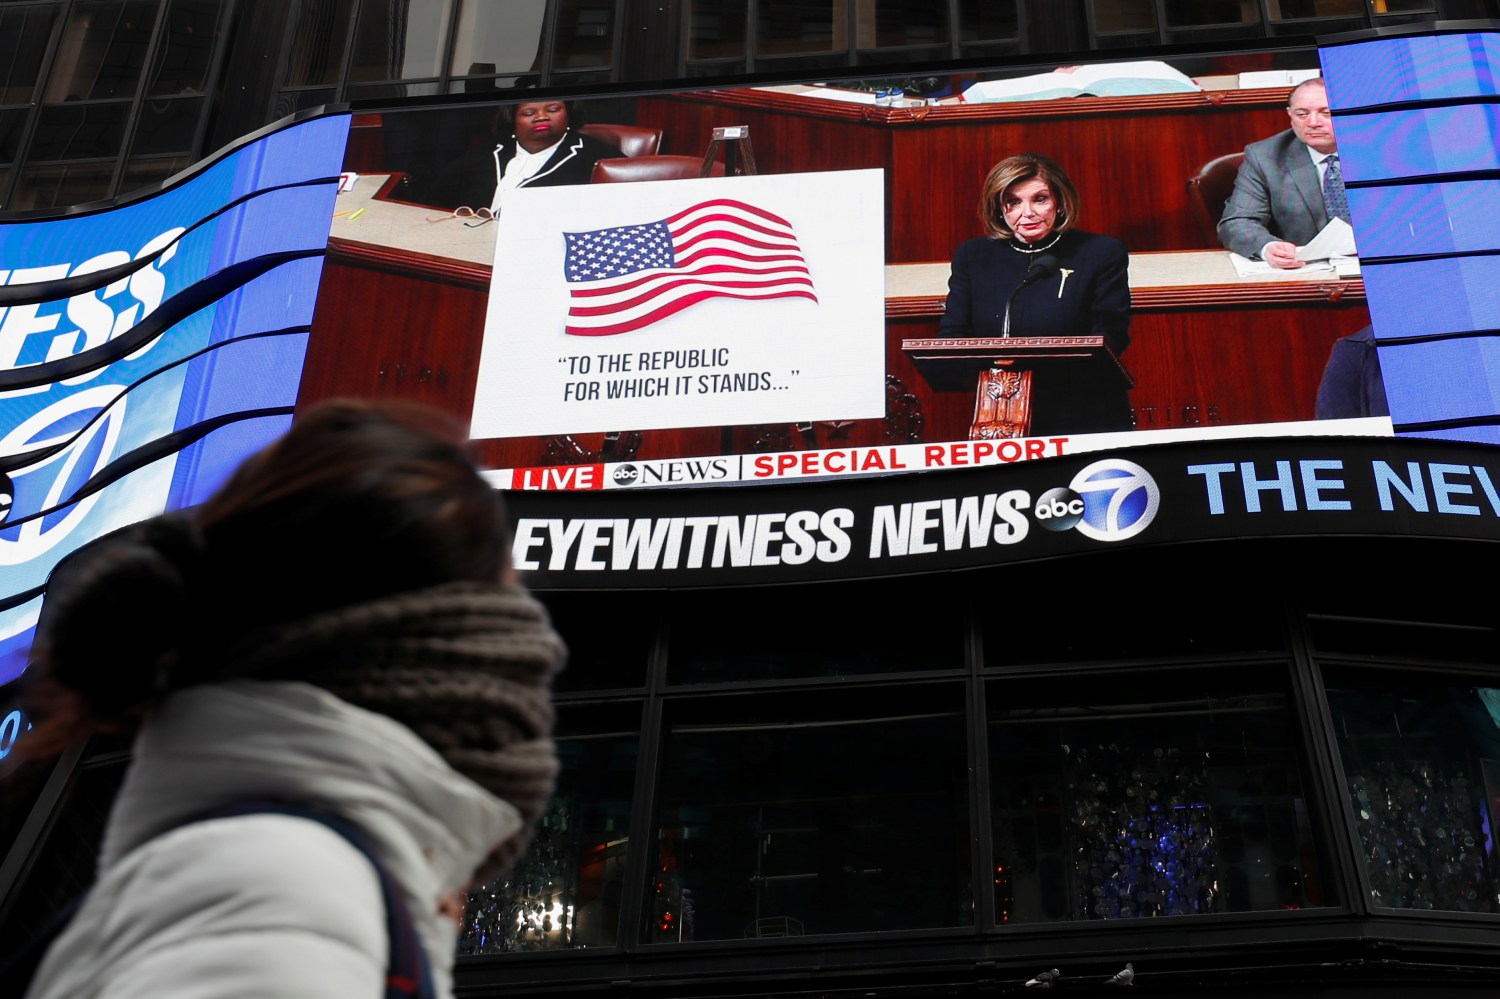 House Speaker Nancy Pelosi (D-CA) is seen on a jumbotron outside ABC News studios speaking to the U.S. House of Representatives during the session to discuss rules ahead of a vote on two articles of impeachment against U.S. President Donald Trump, at Times Square in New York City, New York, U.S., December 18, 2019.  REUTERS/Shannon Stapleton - RC2UXD9M3GK1